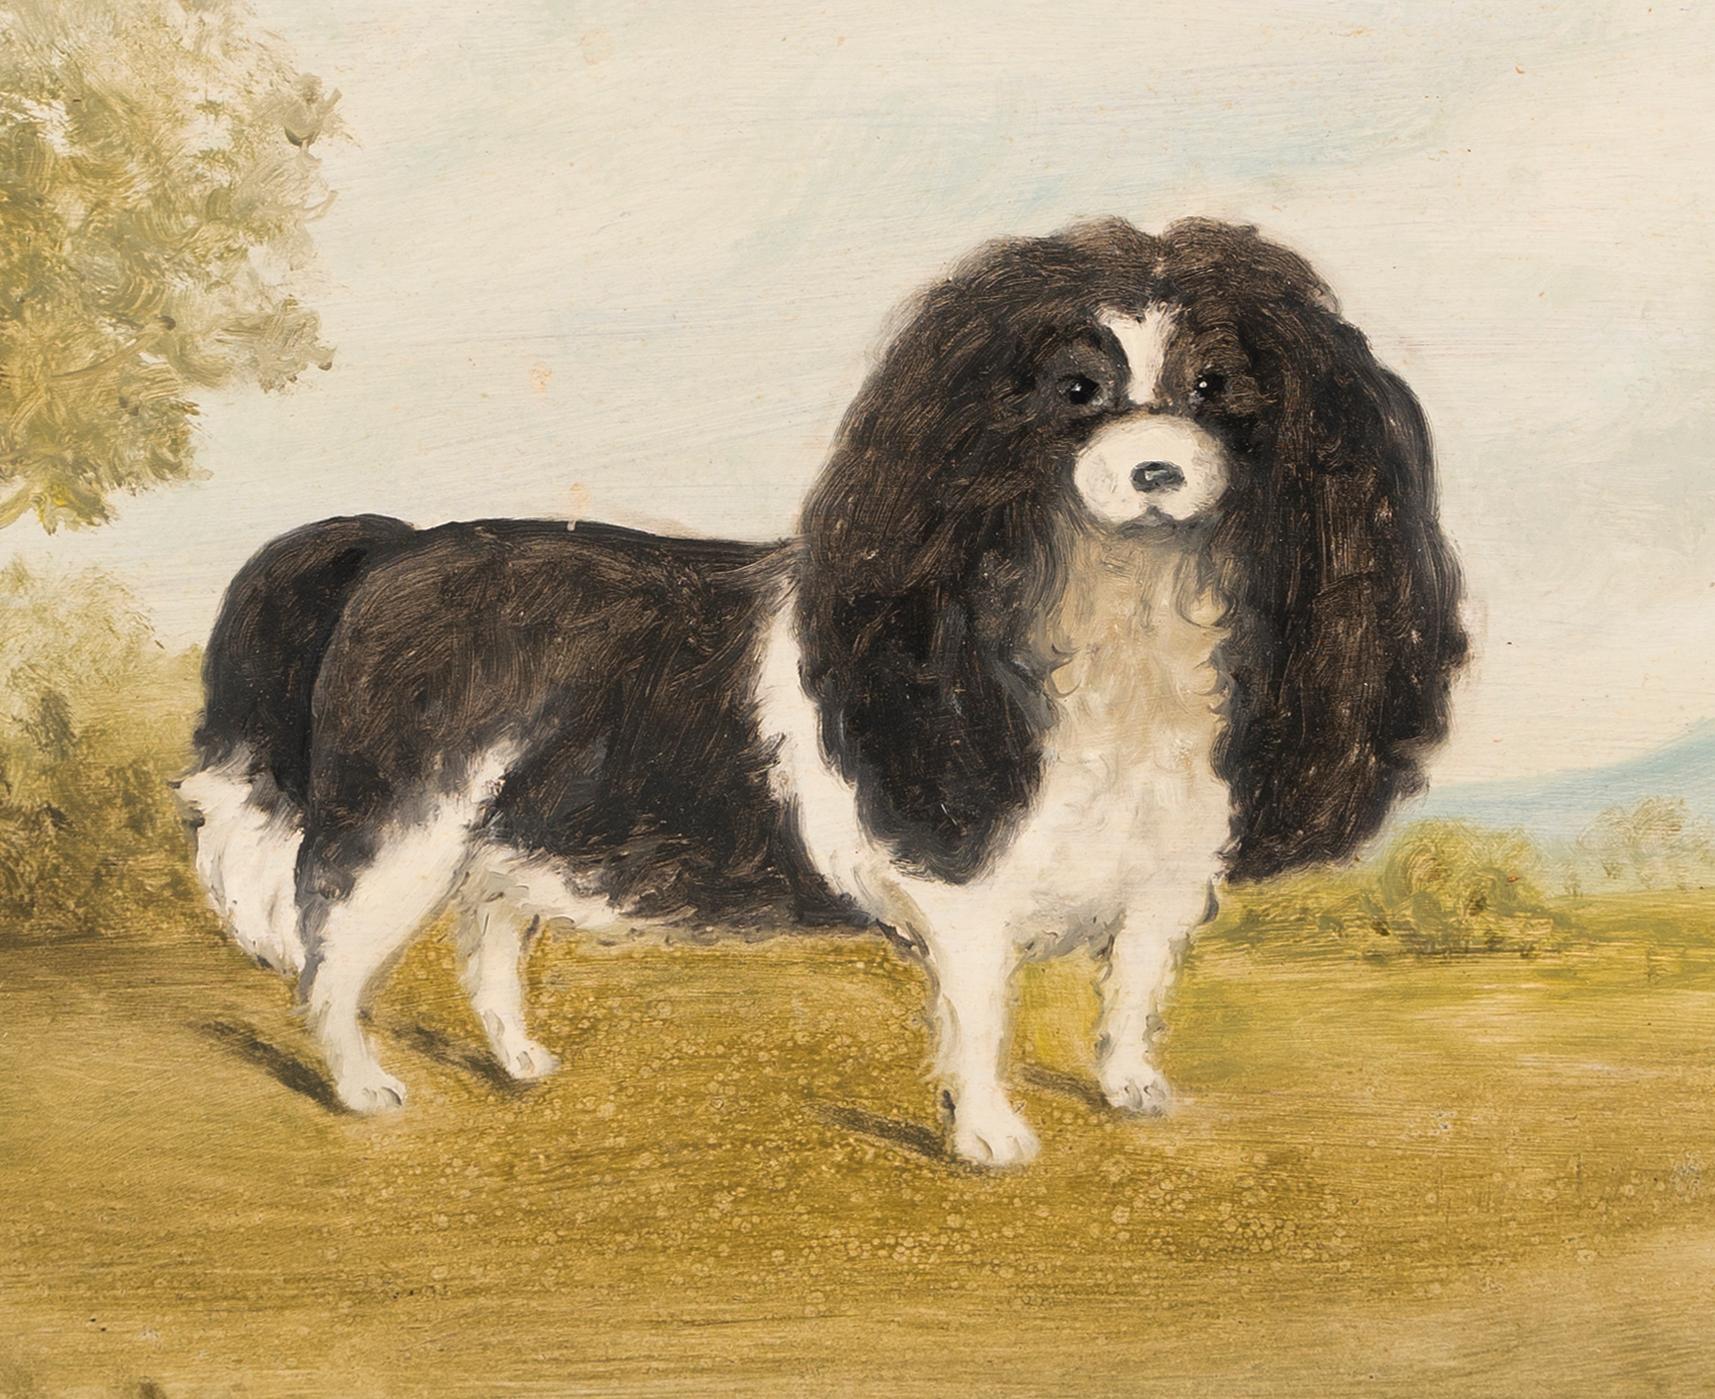 Vintage American portrait of a spaniel dog in a summer landscape.  Oil on board, circa 1920.  No signature found.  Image size, 20L x 16H.  Housed in a period wood frame.